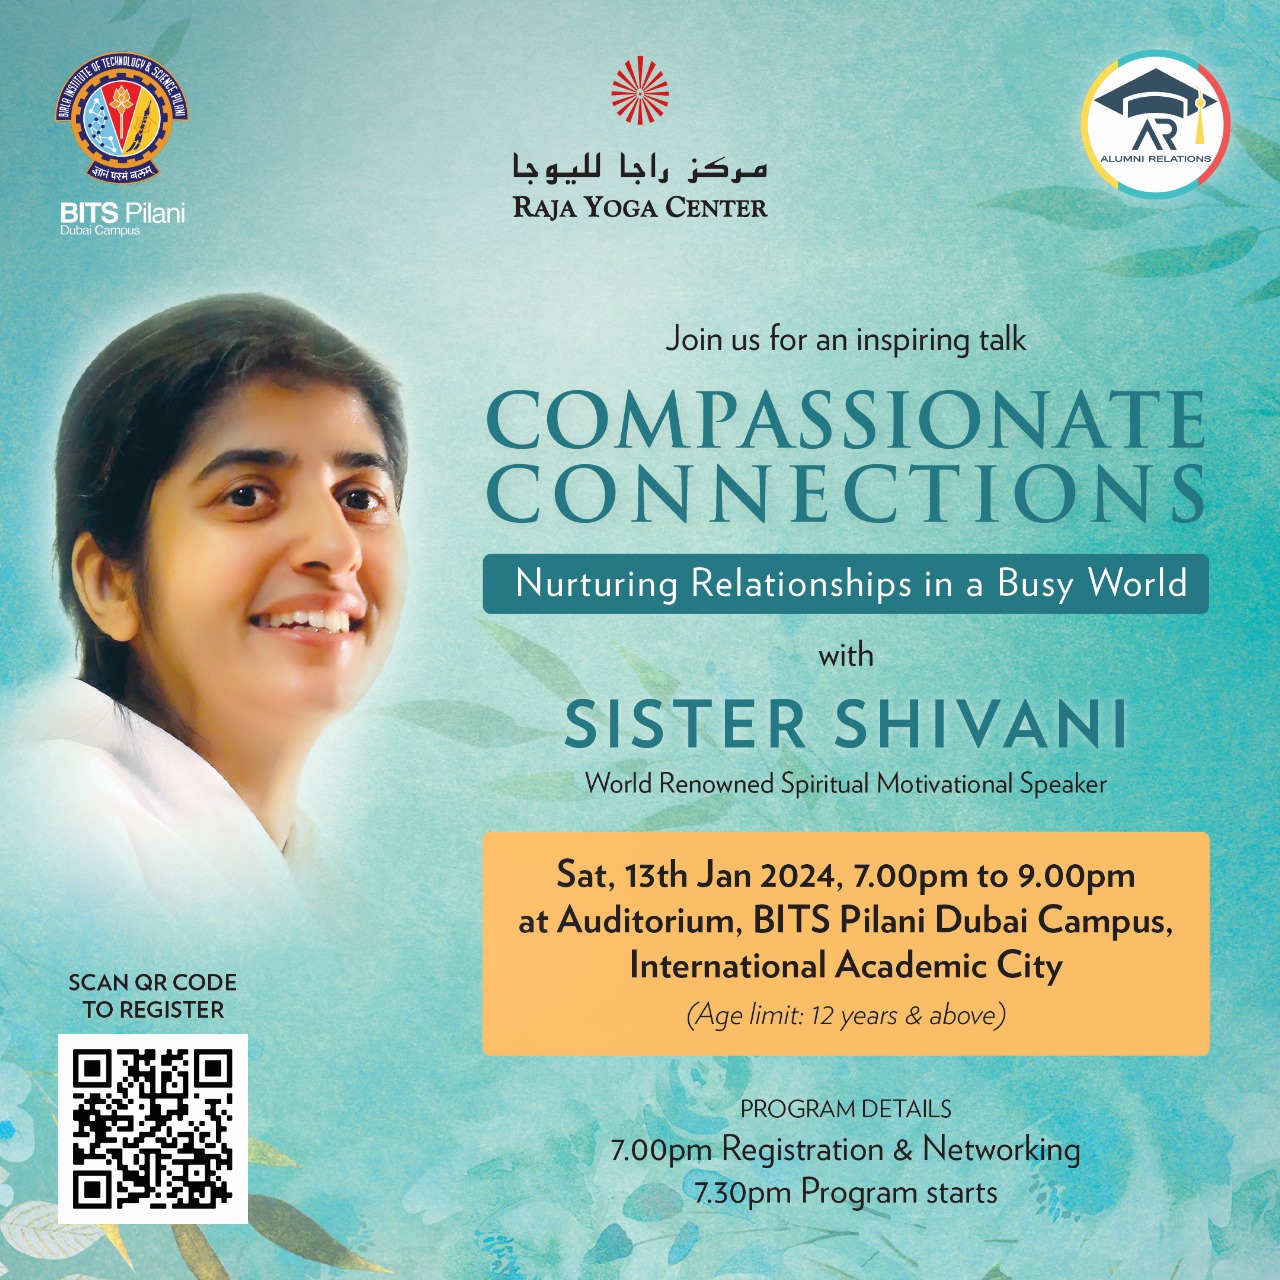 Compassionate connections with sister shivani